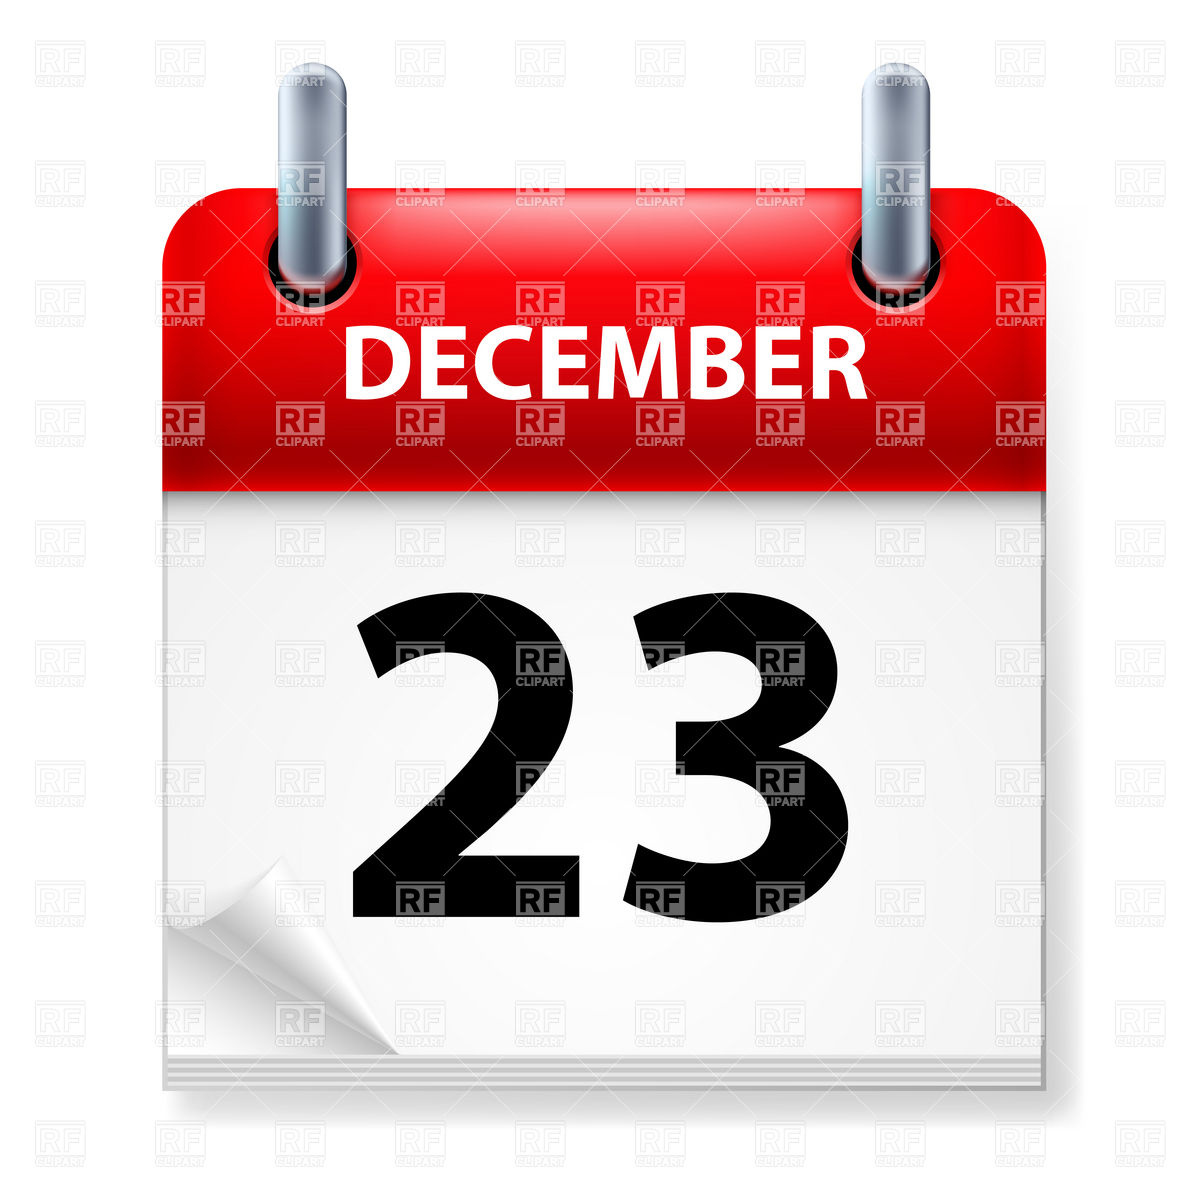 23 Of December Calendar Icon With Curled Corner Download Royalty Free